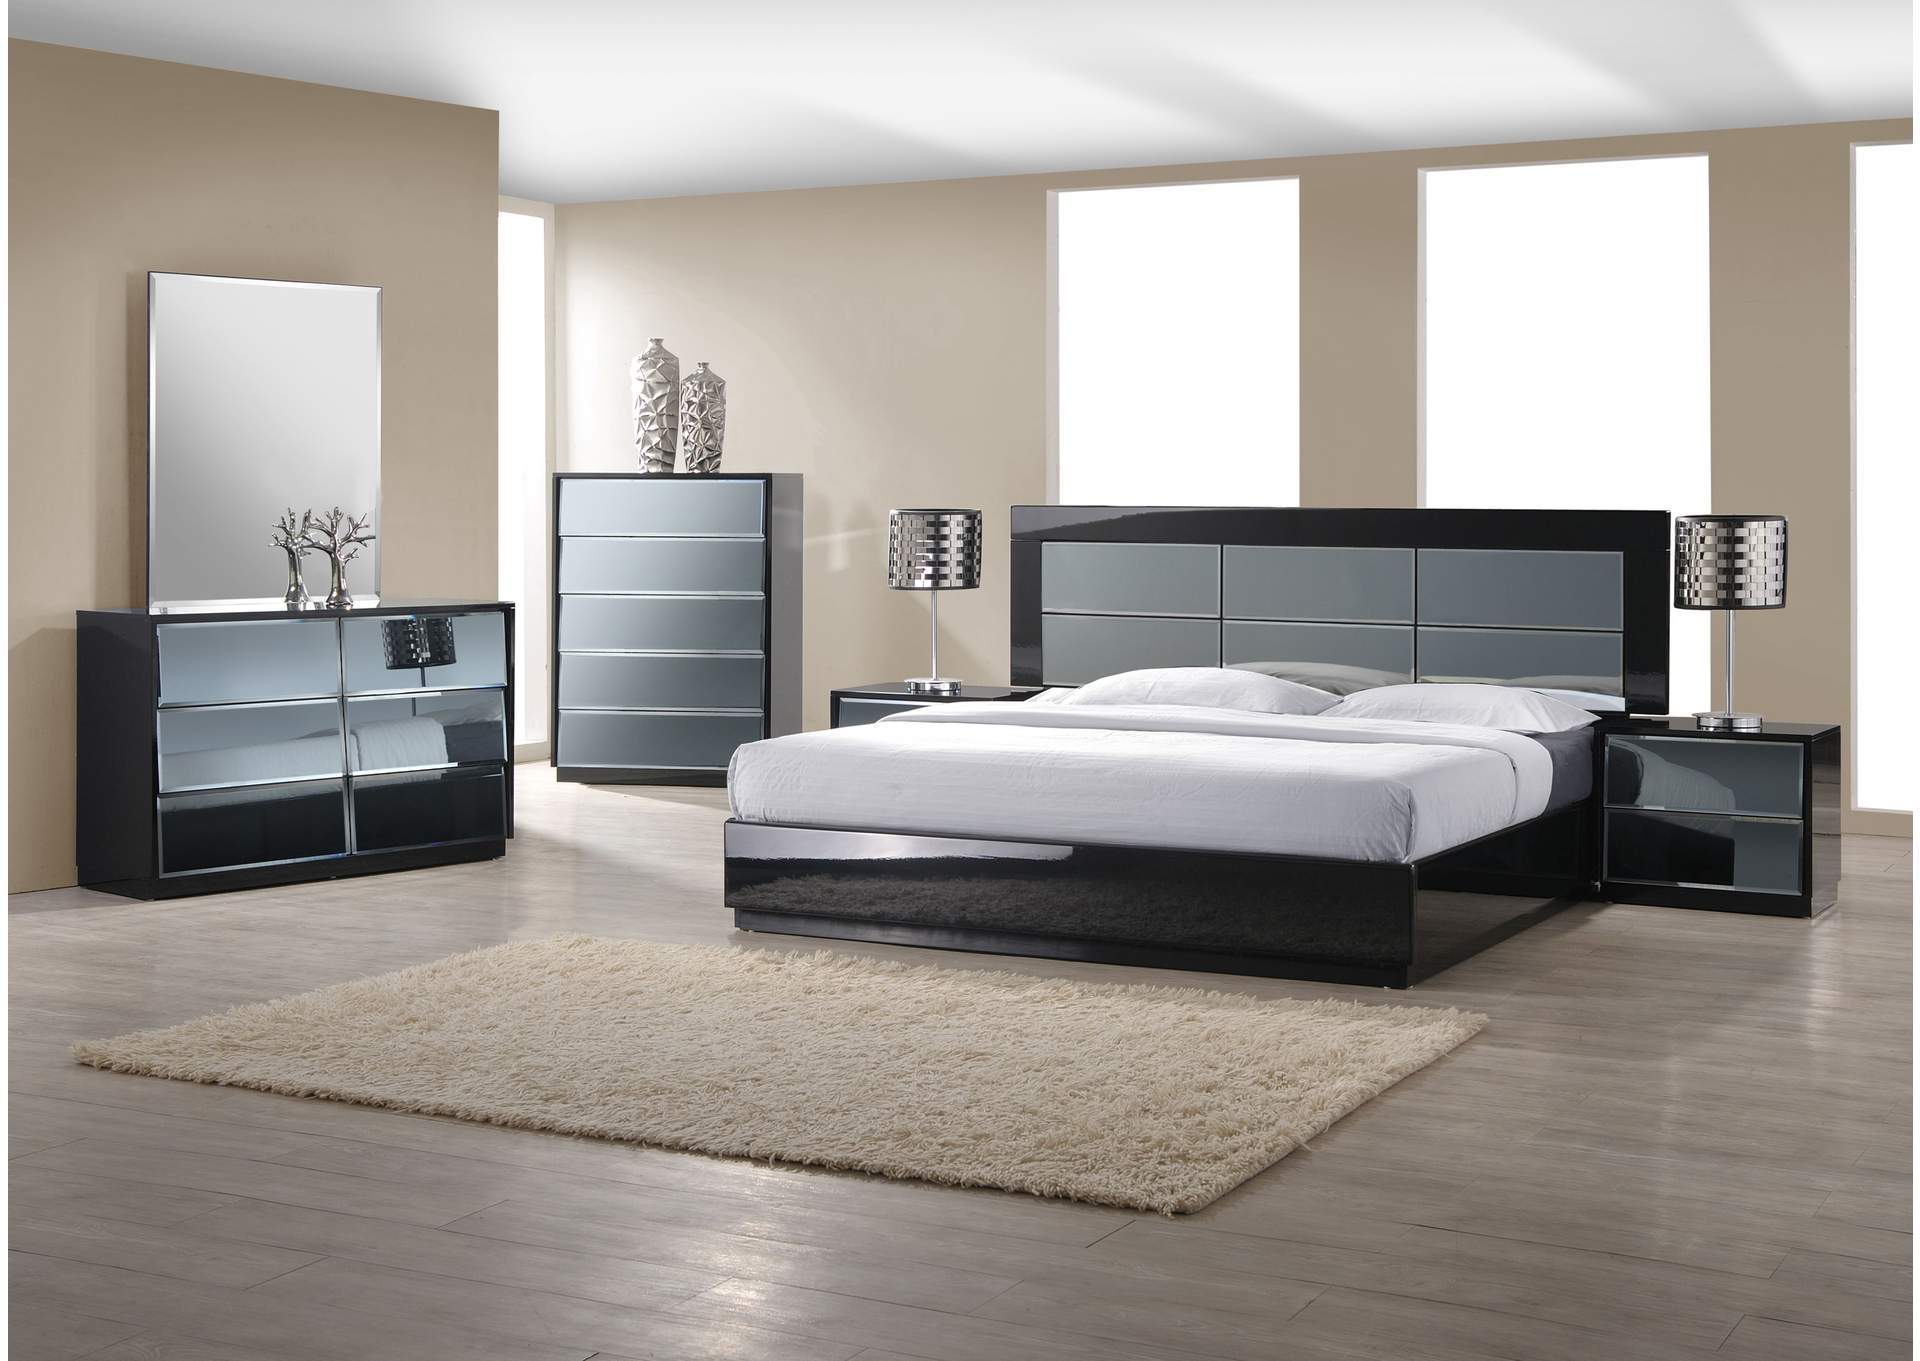 Venice Gloss Black 4 Piece Queen Bedroom Set,Chintaly Imports